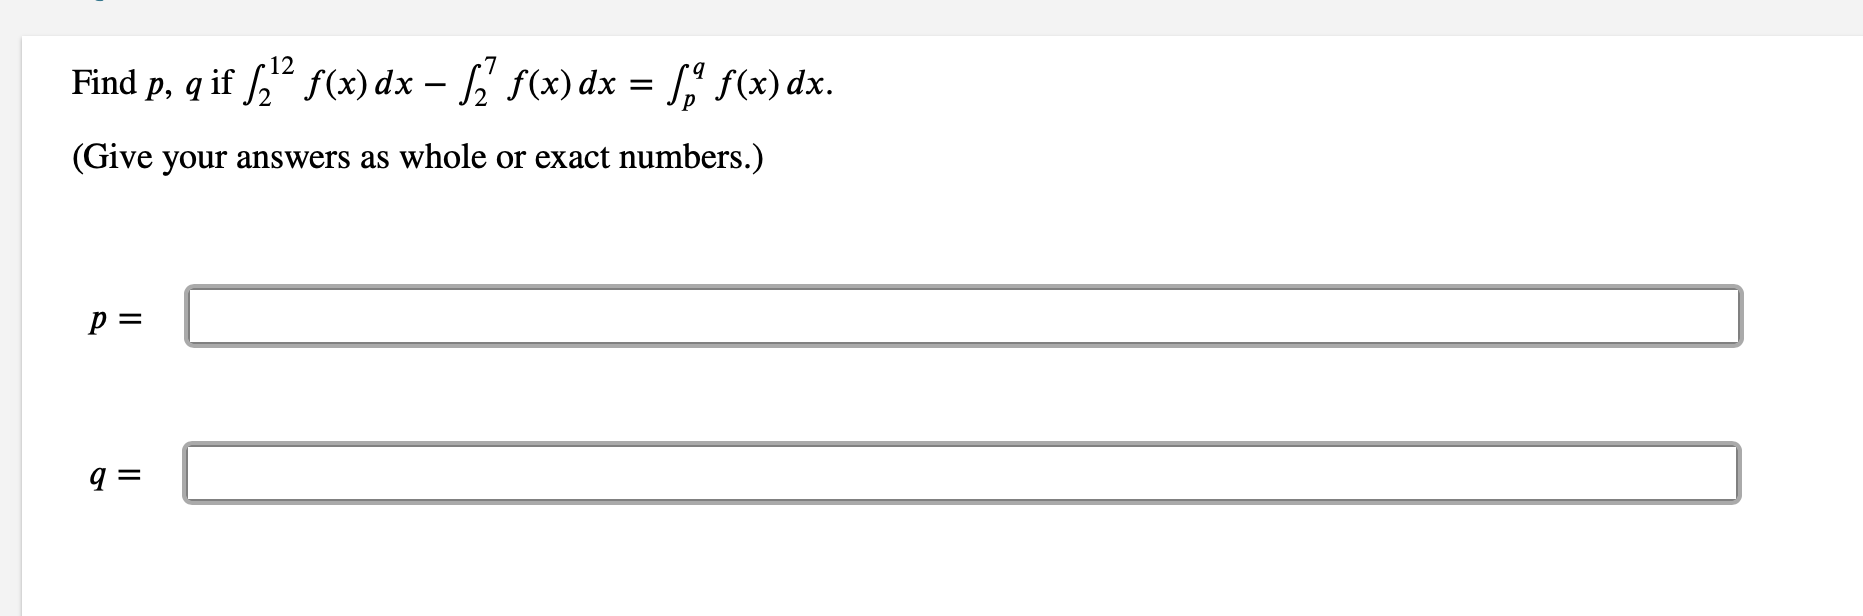 ### Calculus Problem

**Objective:**

Find the values of \( p \) and \( q \) if:
\[ \int_{2}^{12} f(x) \, dx - \int_{2}^{7} f(x) \, dx = \int_{p}^{q} f(x) \, dx \]

**Instructions:**

Give your answers as whole or exact numbers.

**Solution Boxes:**

\[ p = \]
\[ q = \]